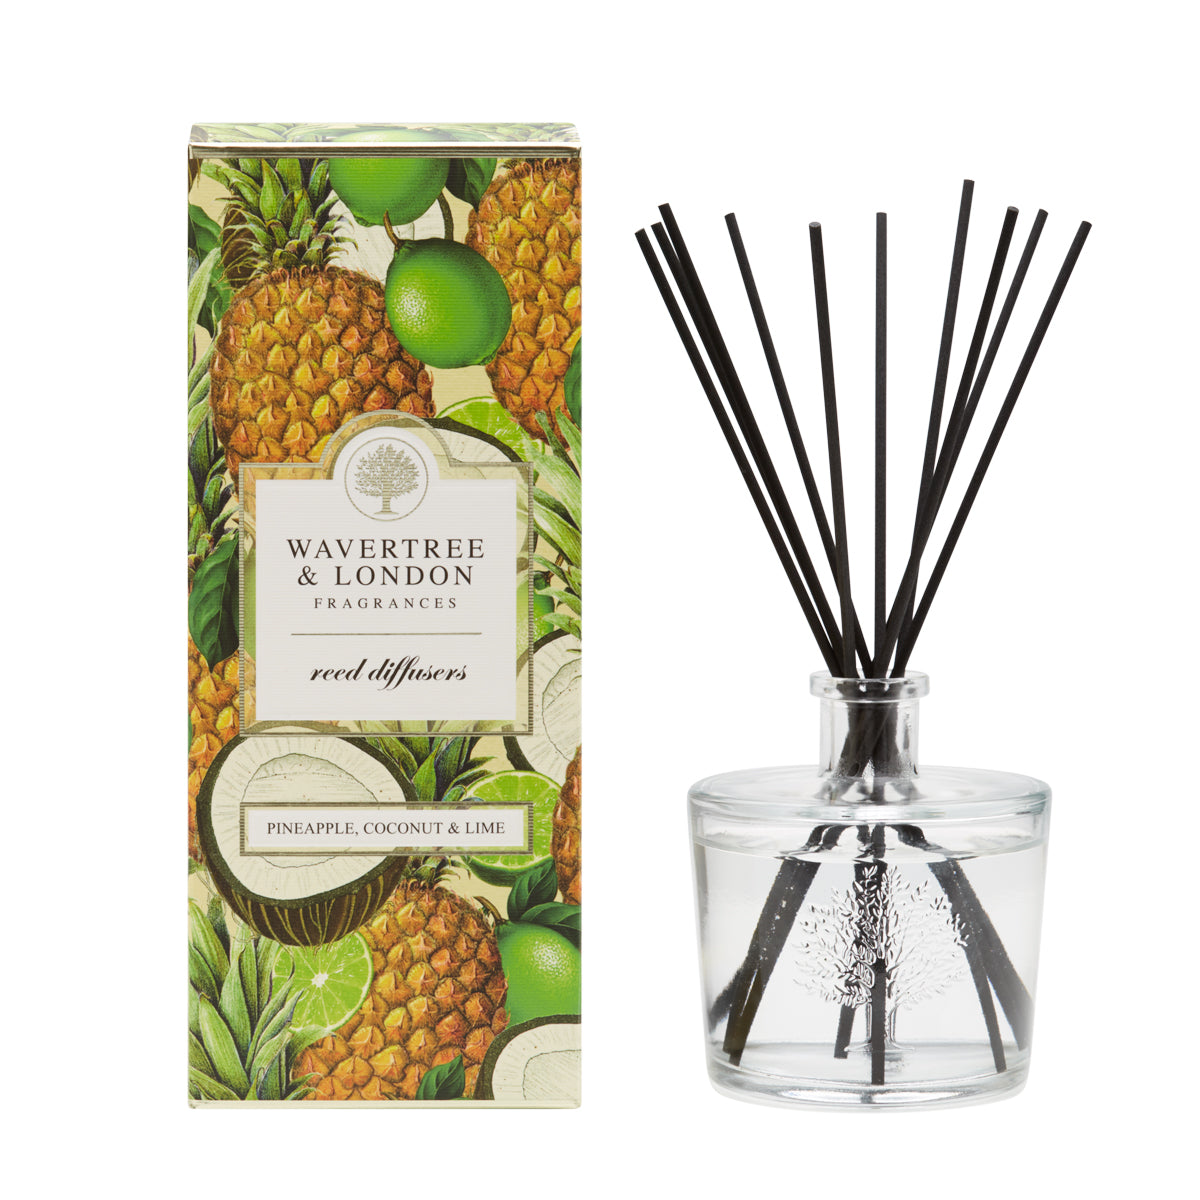 Glass diffuser with black reeds - pineapple, coconut and lime